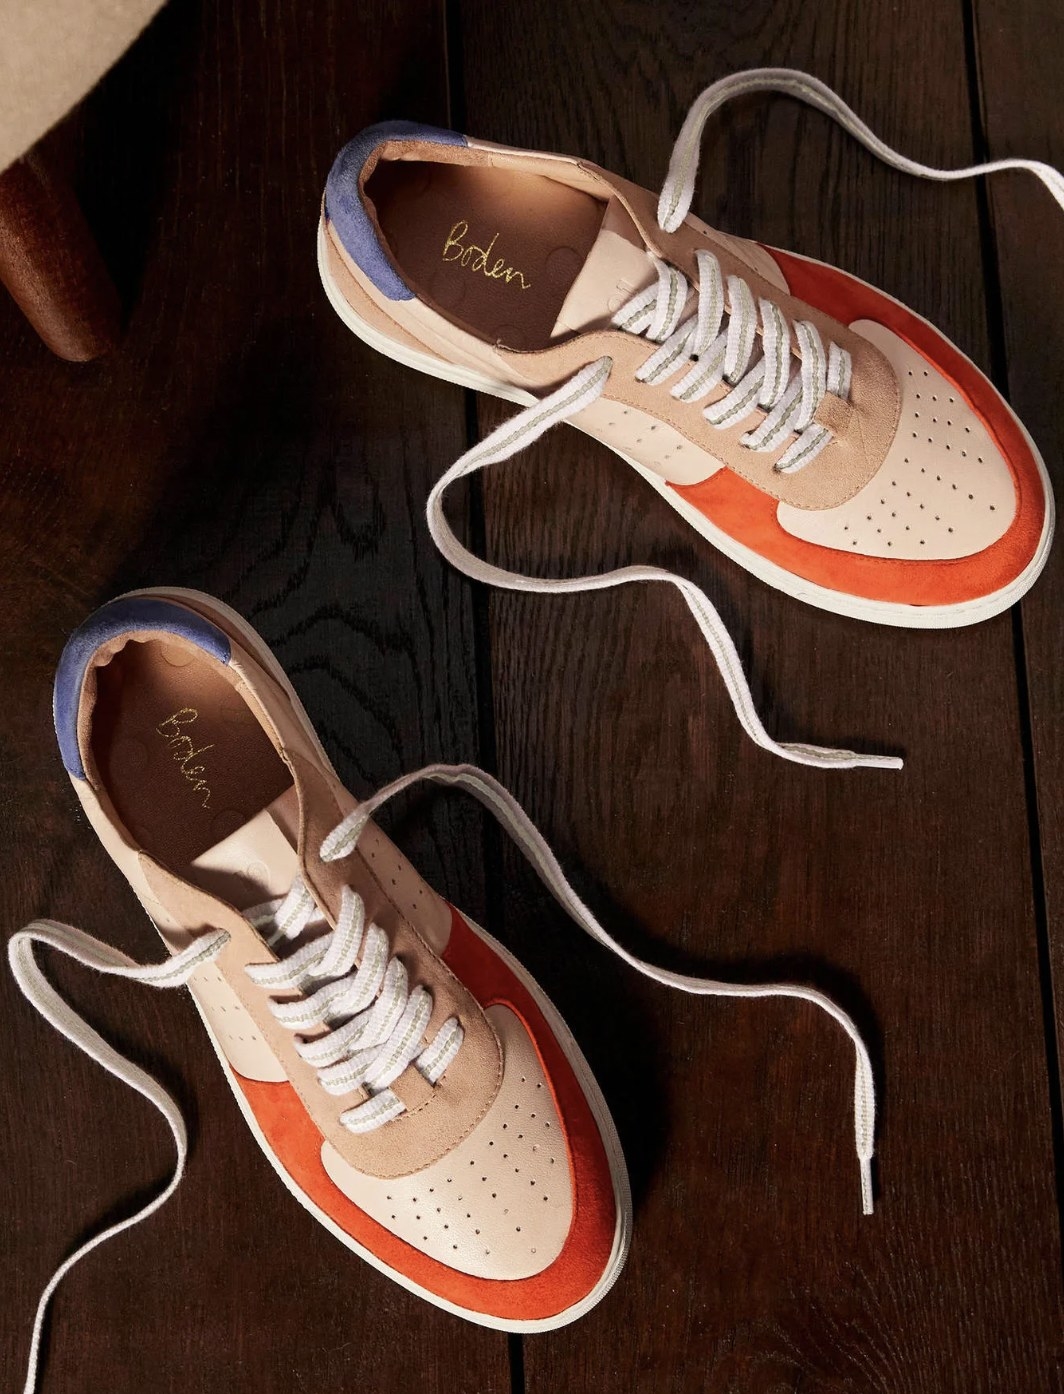 The tan sneakers with orange and purple colorblocks